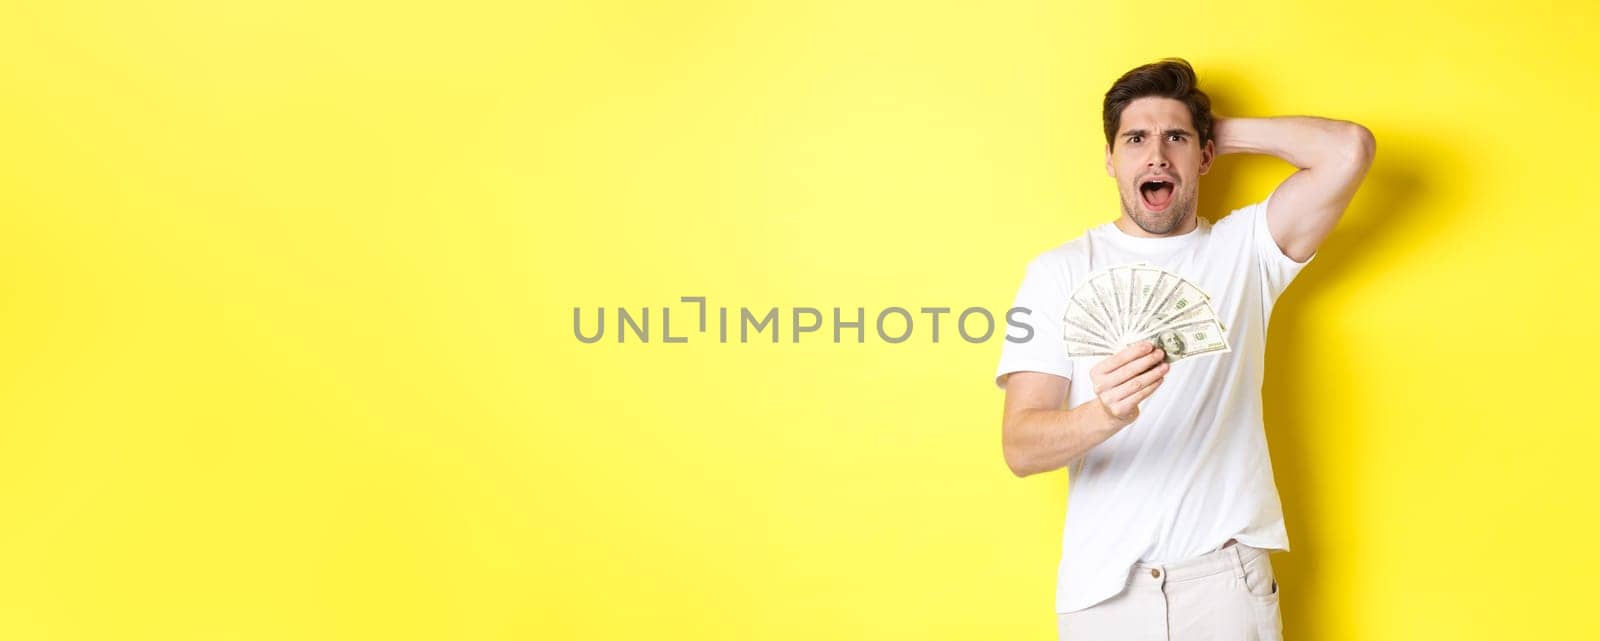 Frustrated man holding money, shouting and panicking, standing over yellow background.